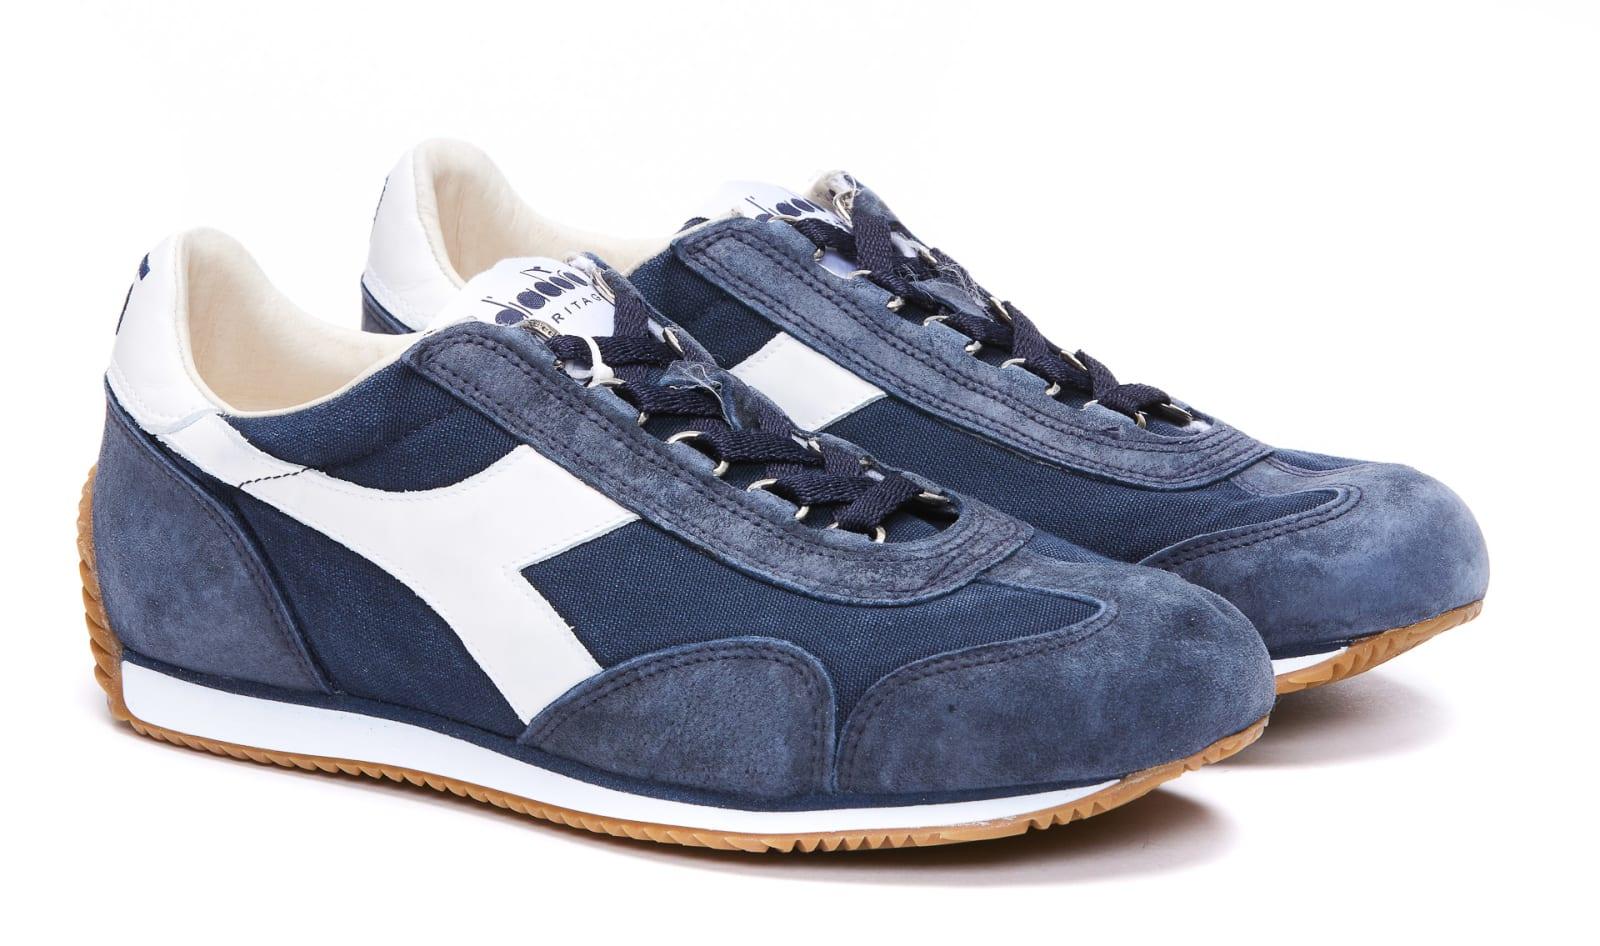 Equipe Stone Stonewashed Trainer - Blue, Mens Shoes Online